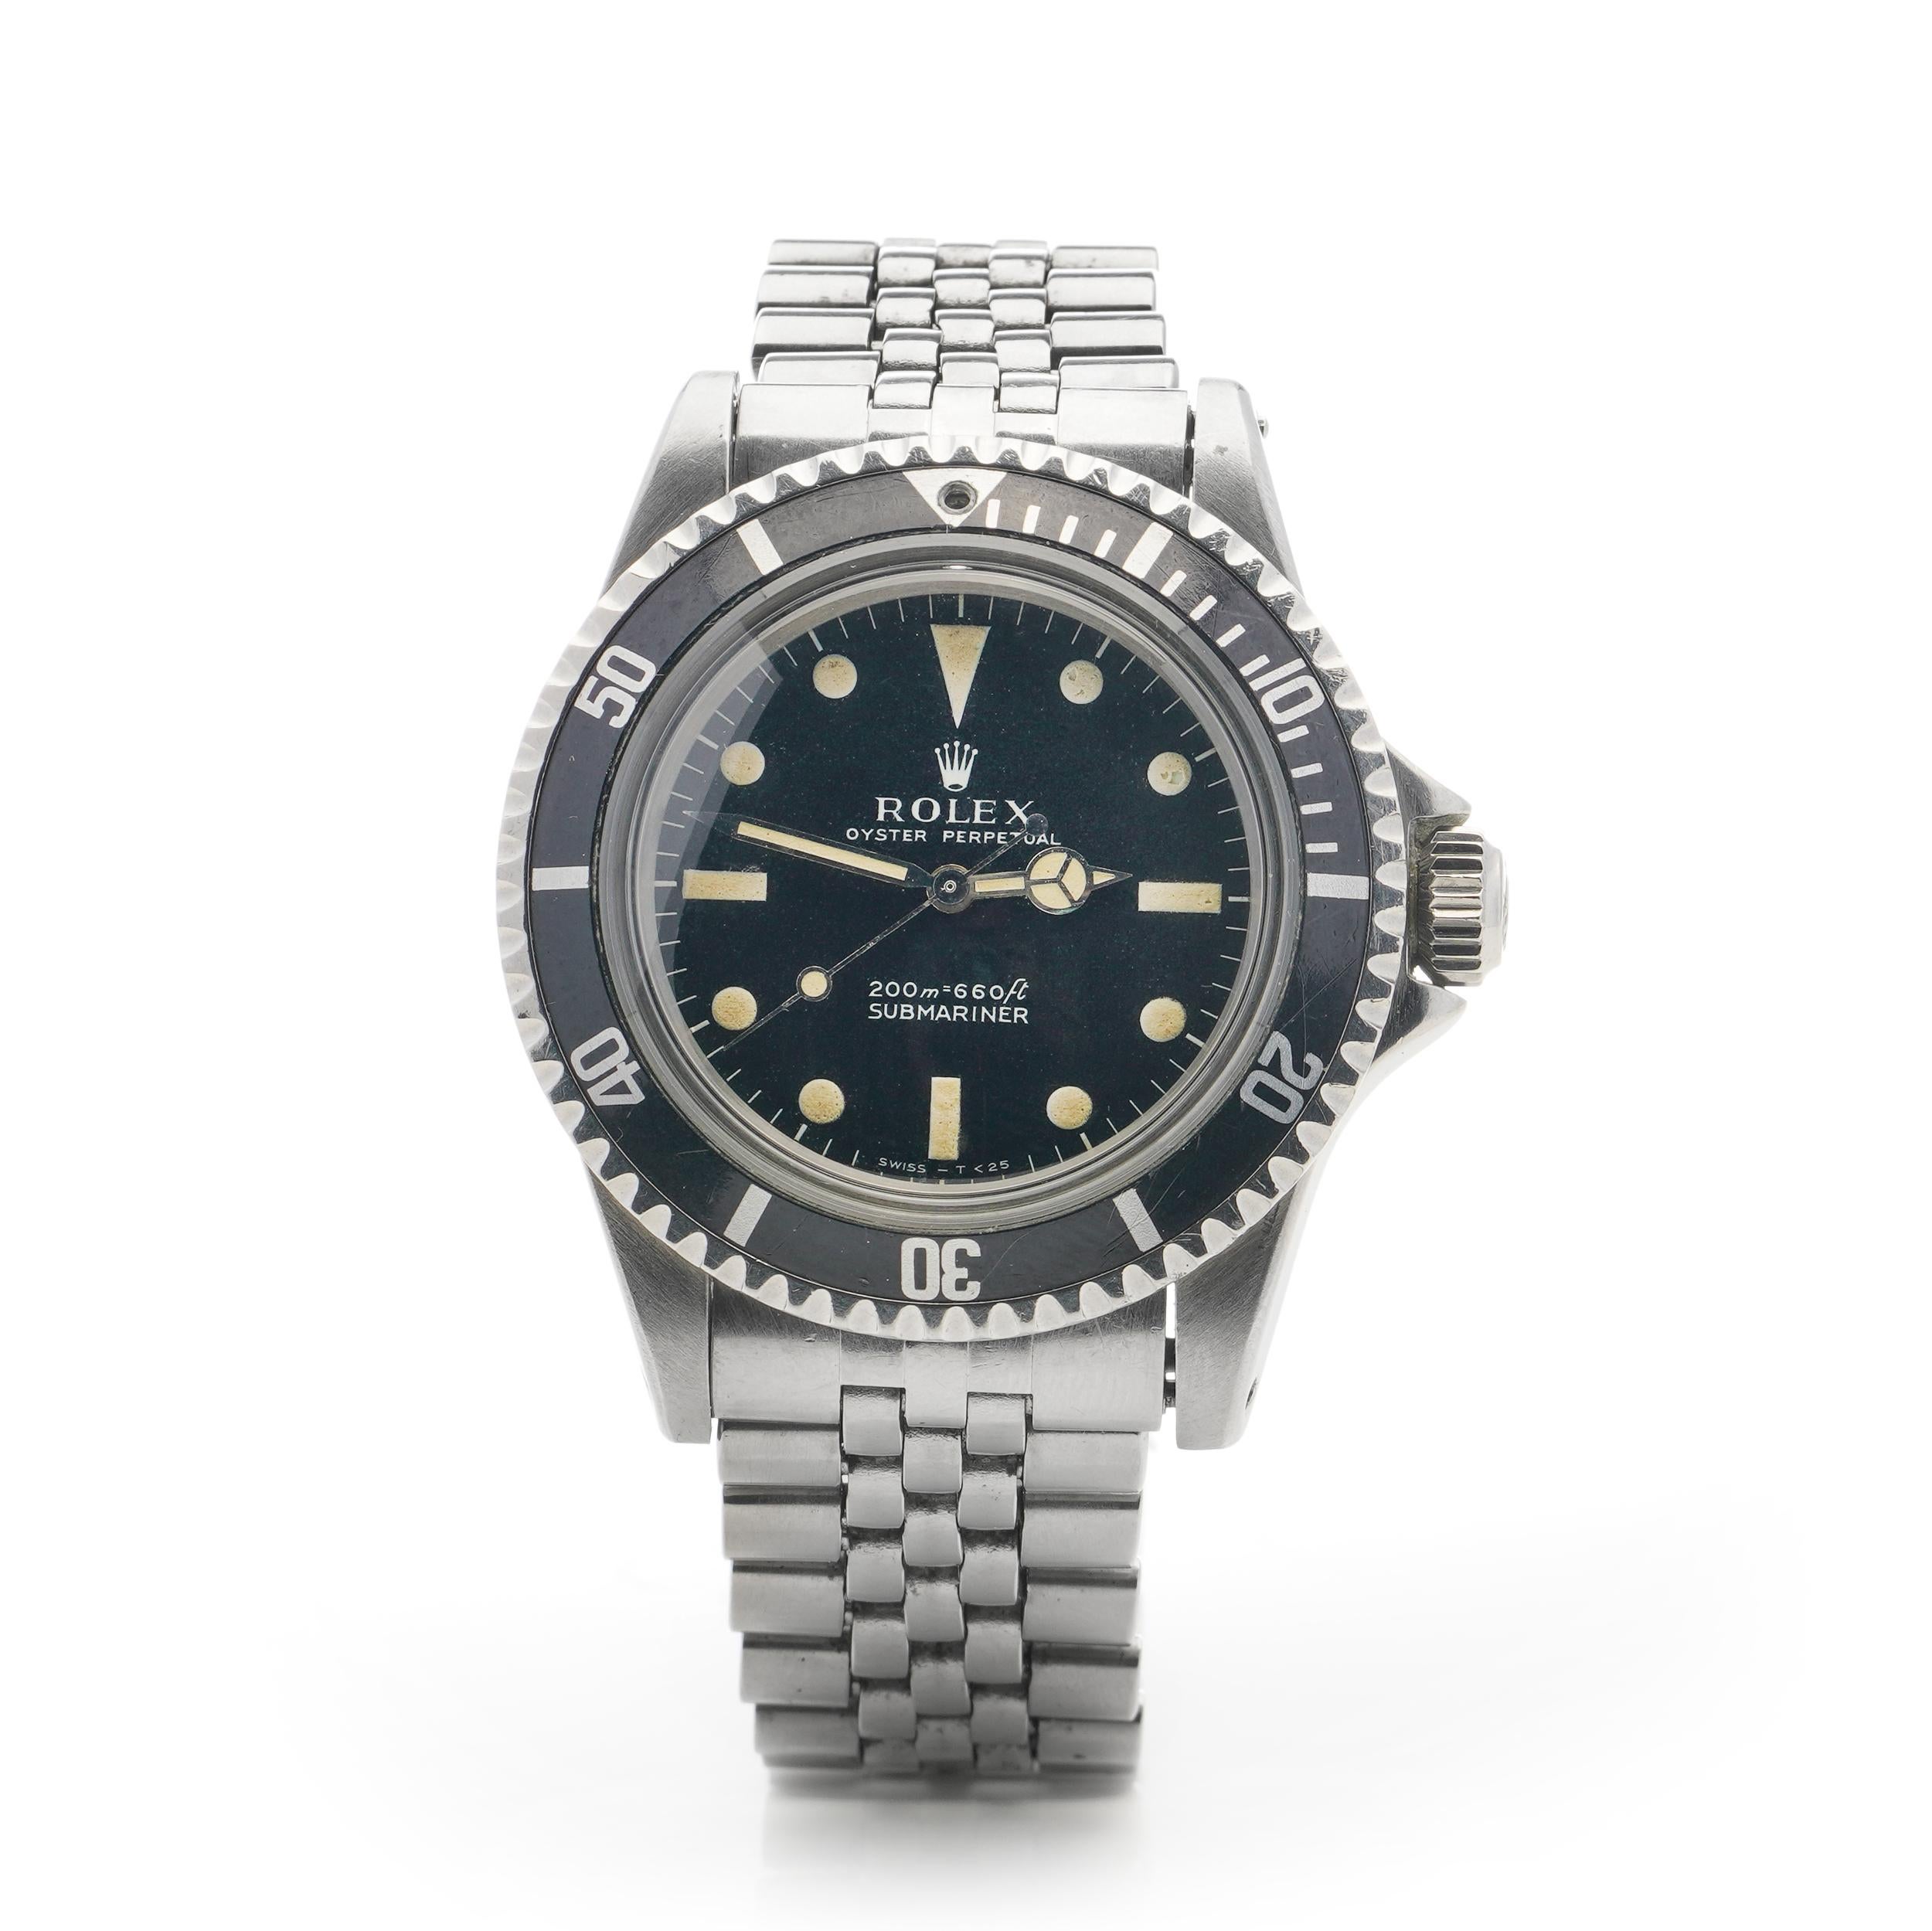 Rolex Oyster Perpetual Submariner, 5513, Stainless Steel Watch 

Made in Switzerland, Circa 1967  

Case Diameter: 40 mm
Crown: Original Rolex
Dial: Signed Rolex
Movement: Automatic Rolex Watchband Material: Stainless Steel Dial: Black
Case